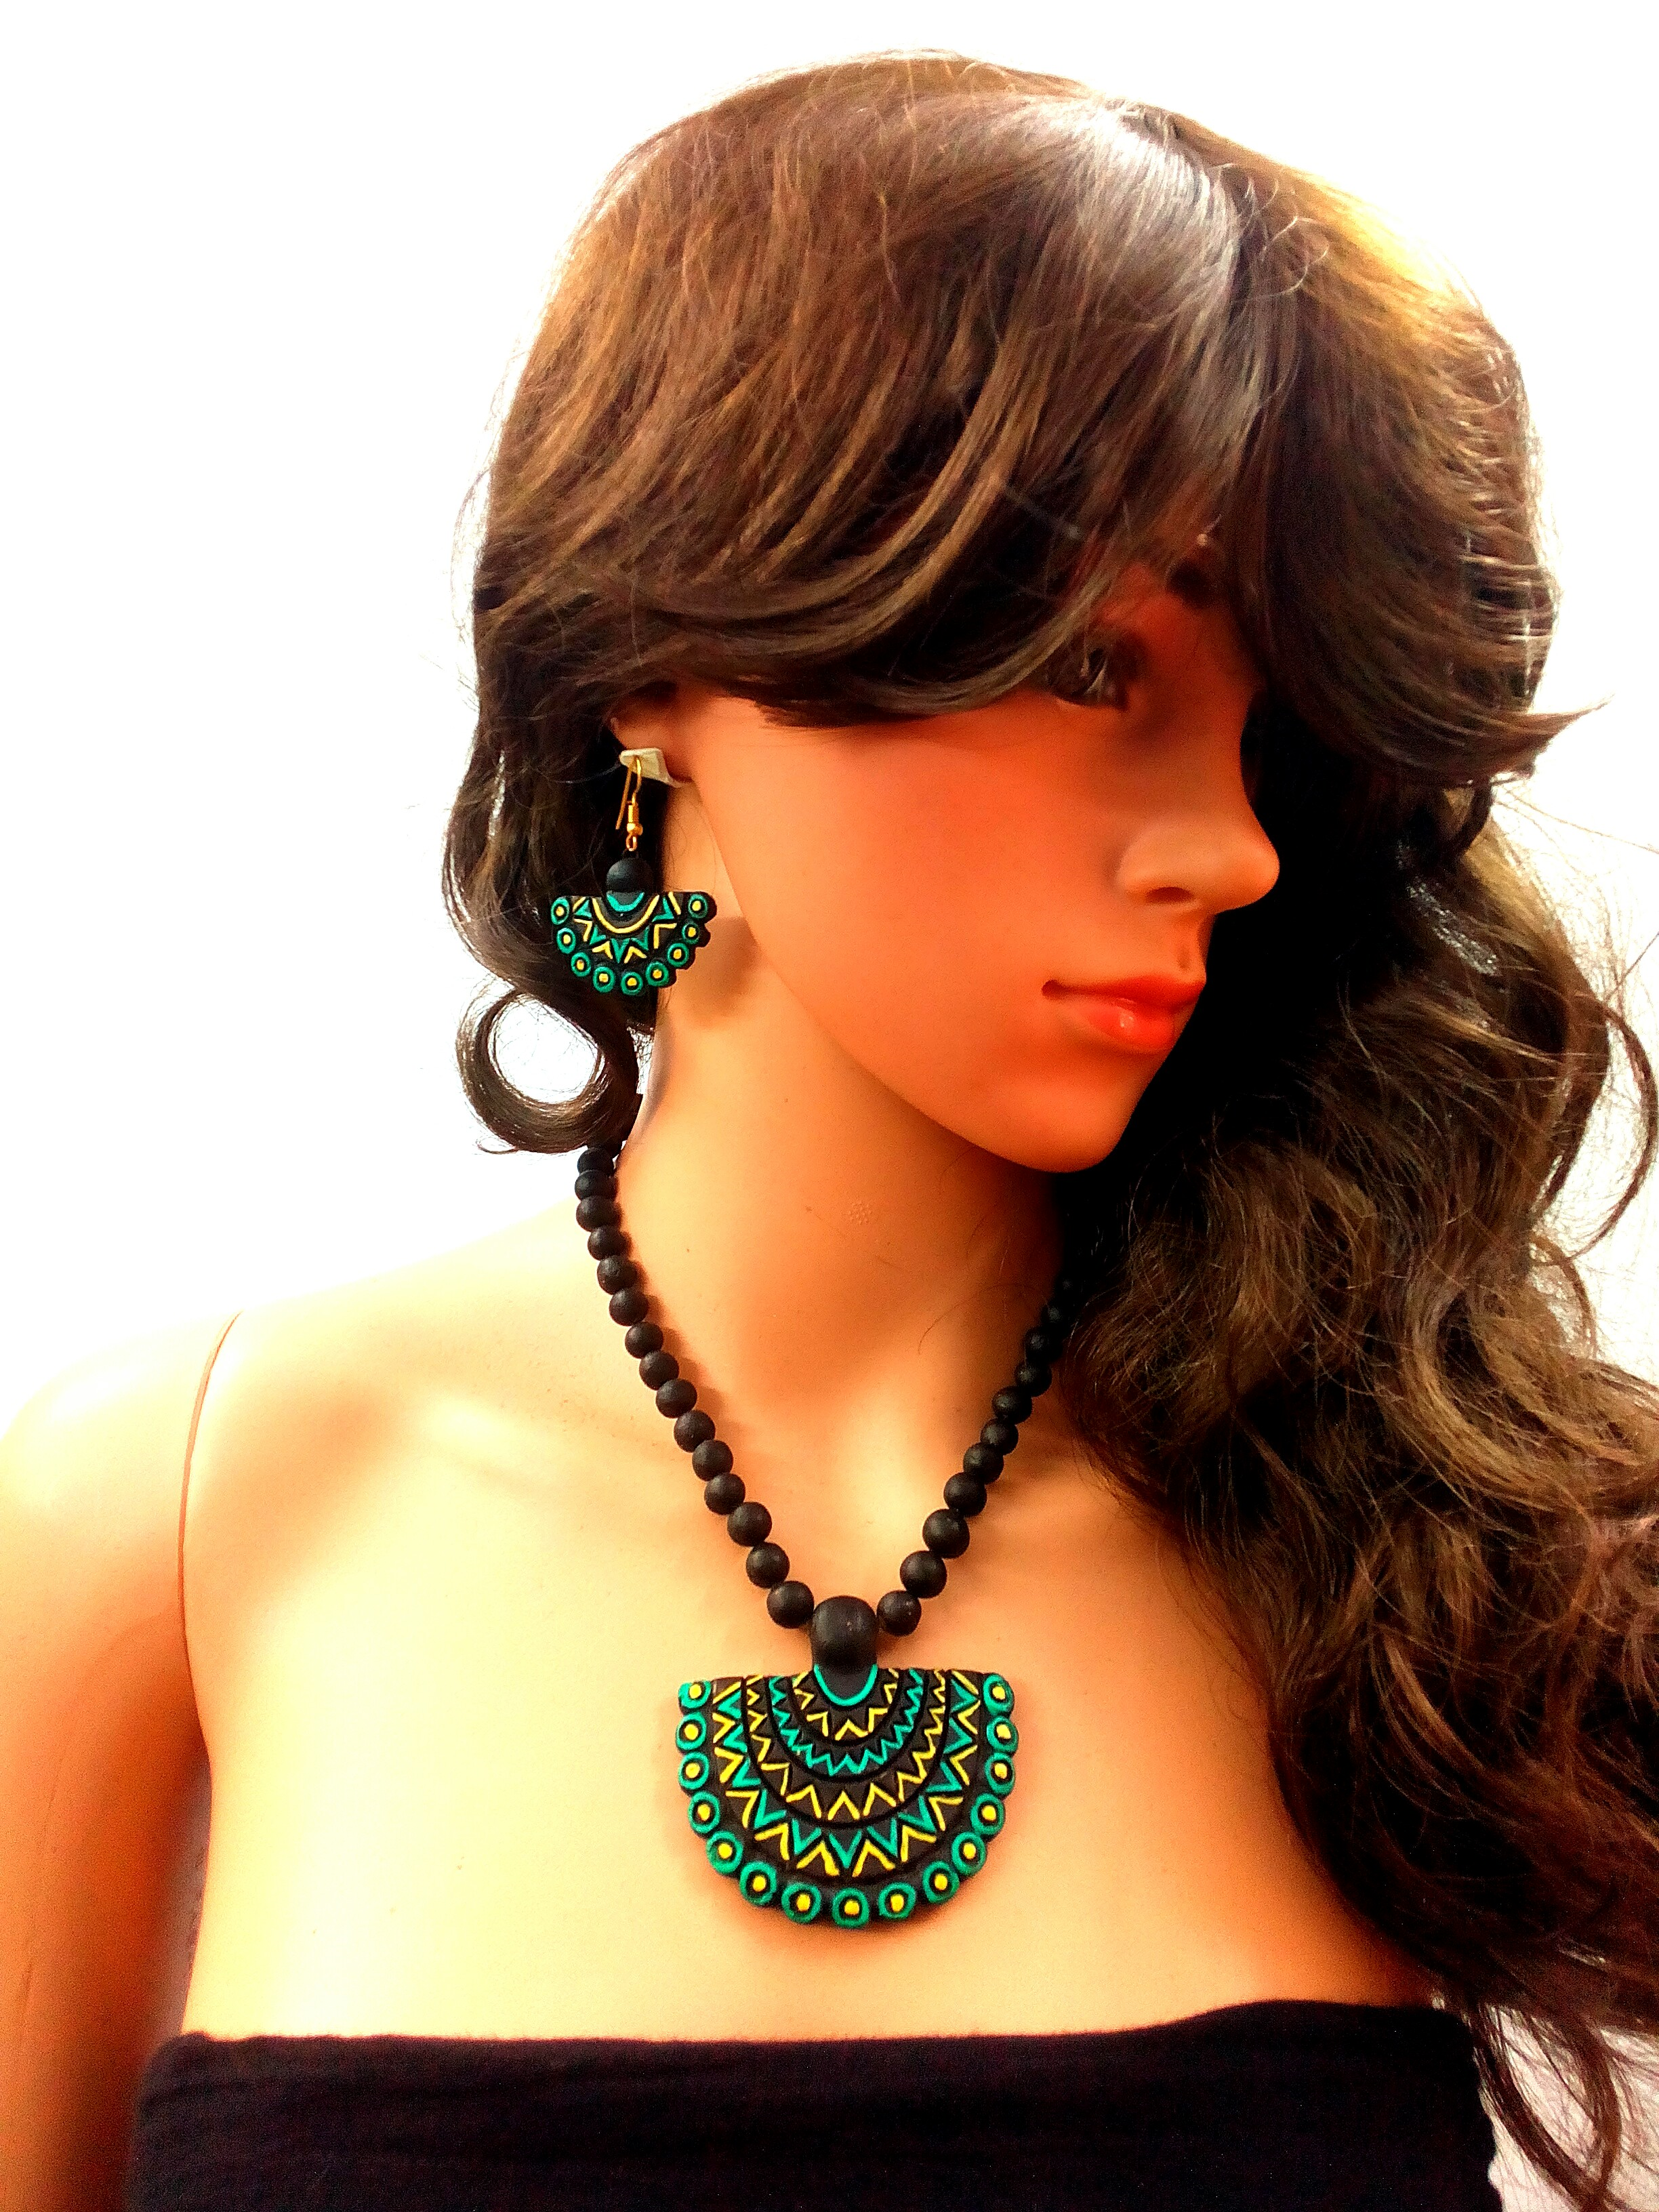 Excellent Collections of handmade unique designs of Terracotta Necklaces tantalizing designs and themes